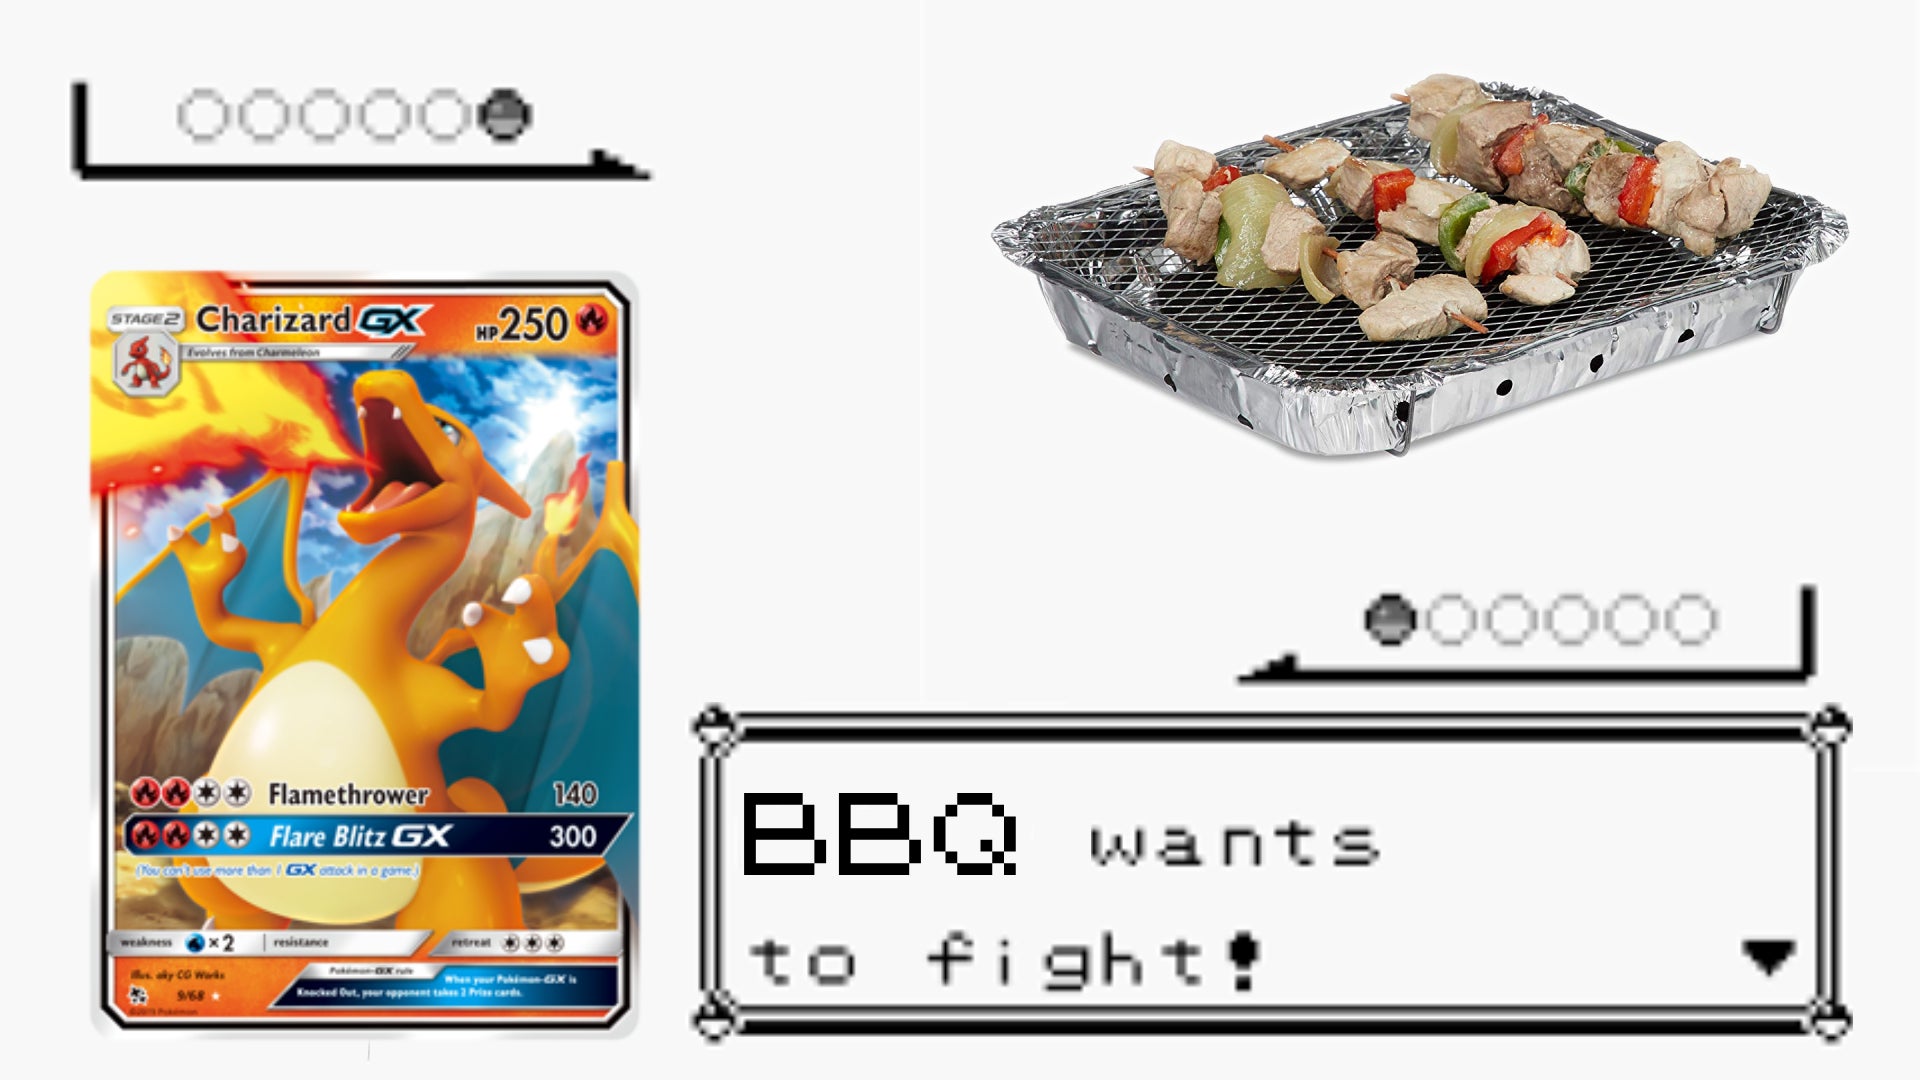 PSA Mint 9 Charizard prepares to fight with a disposable BBQ.